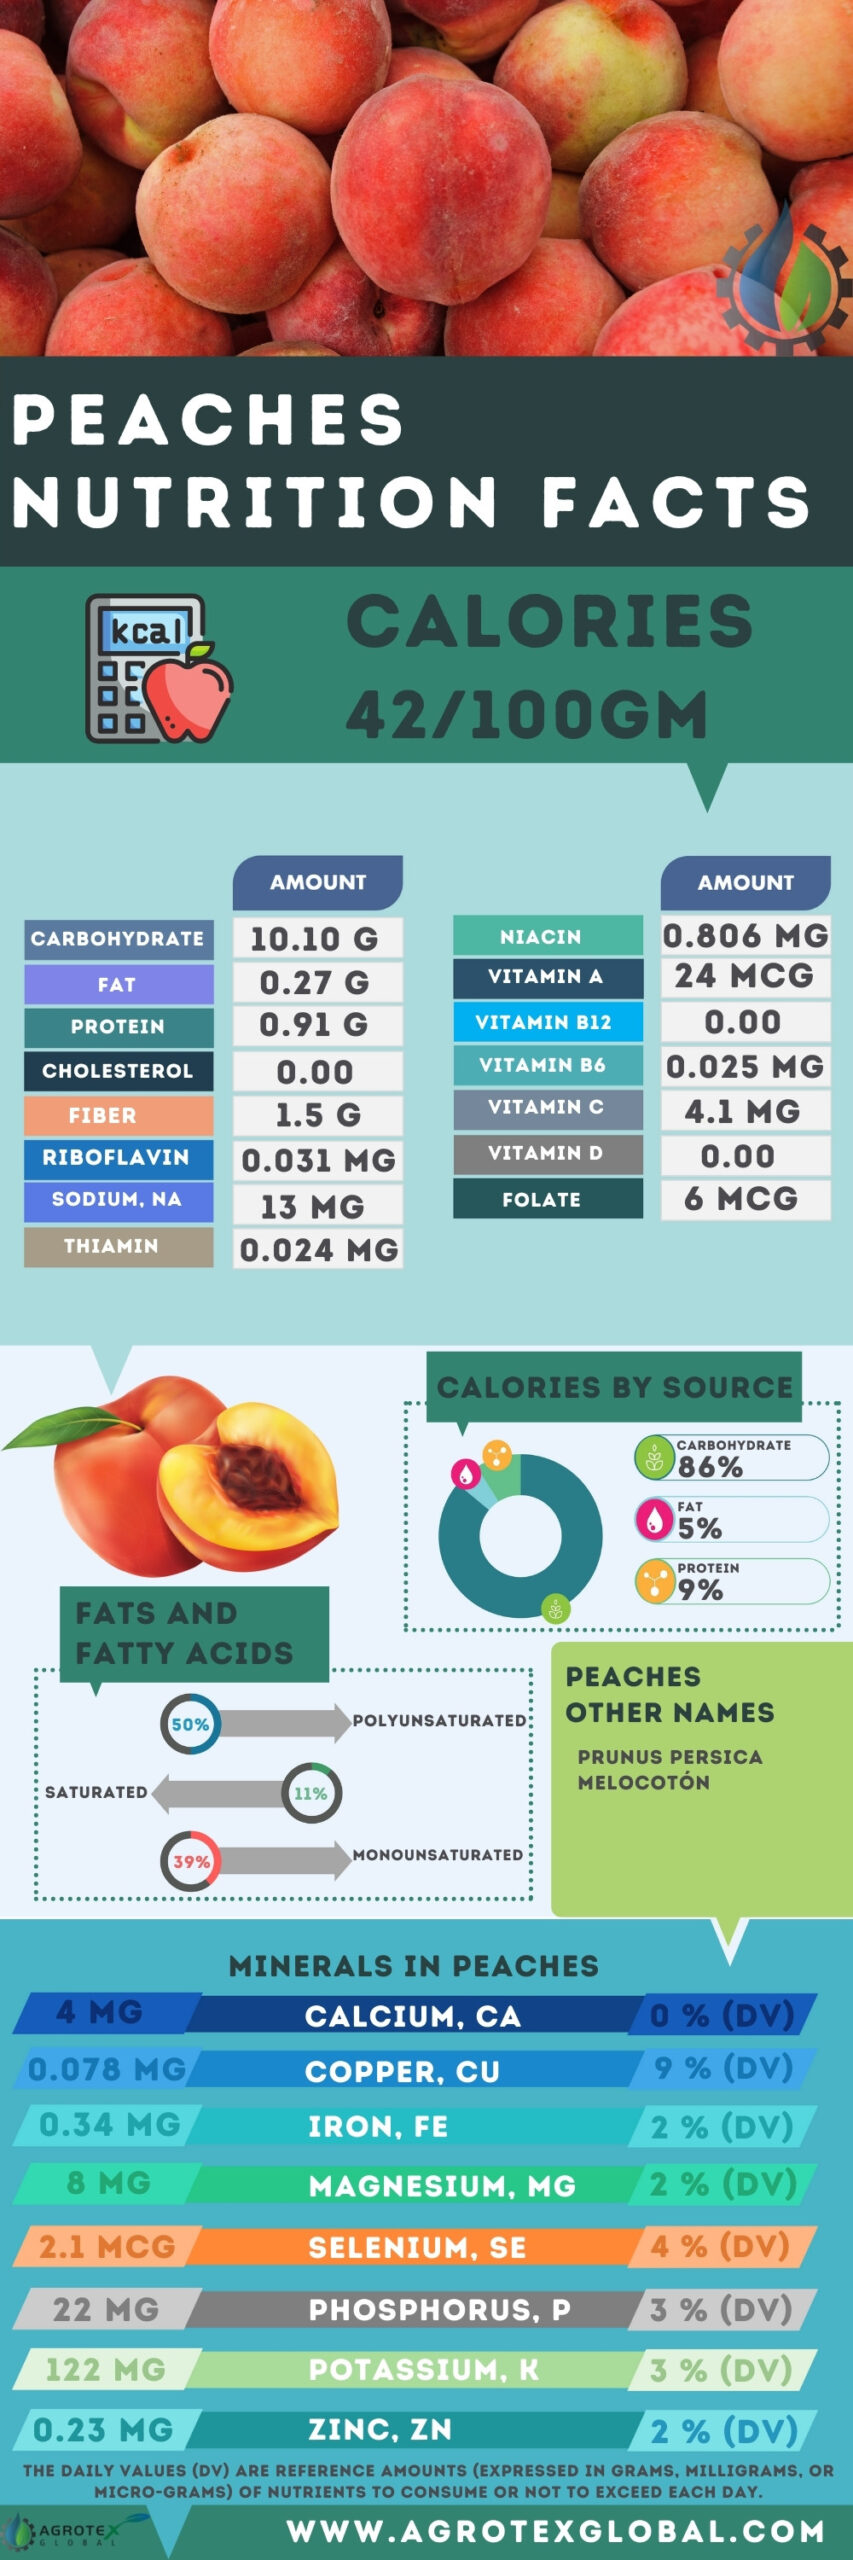 Peaches NUTRITION FACTS calorie chart infographic